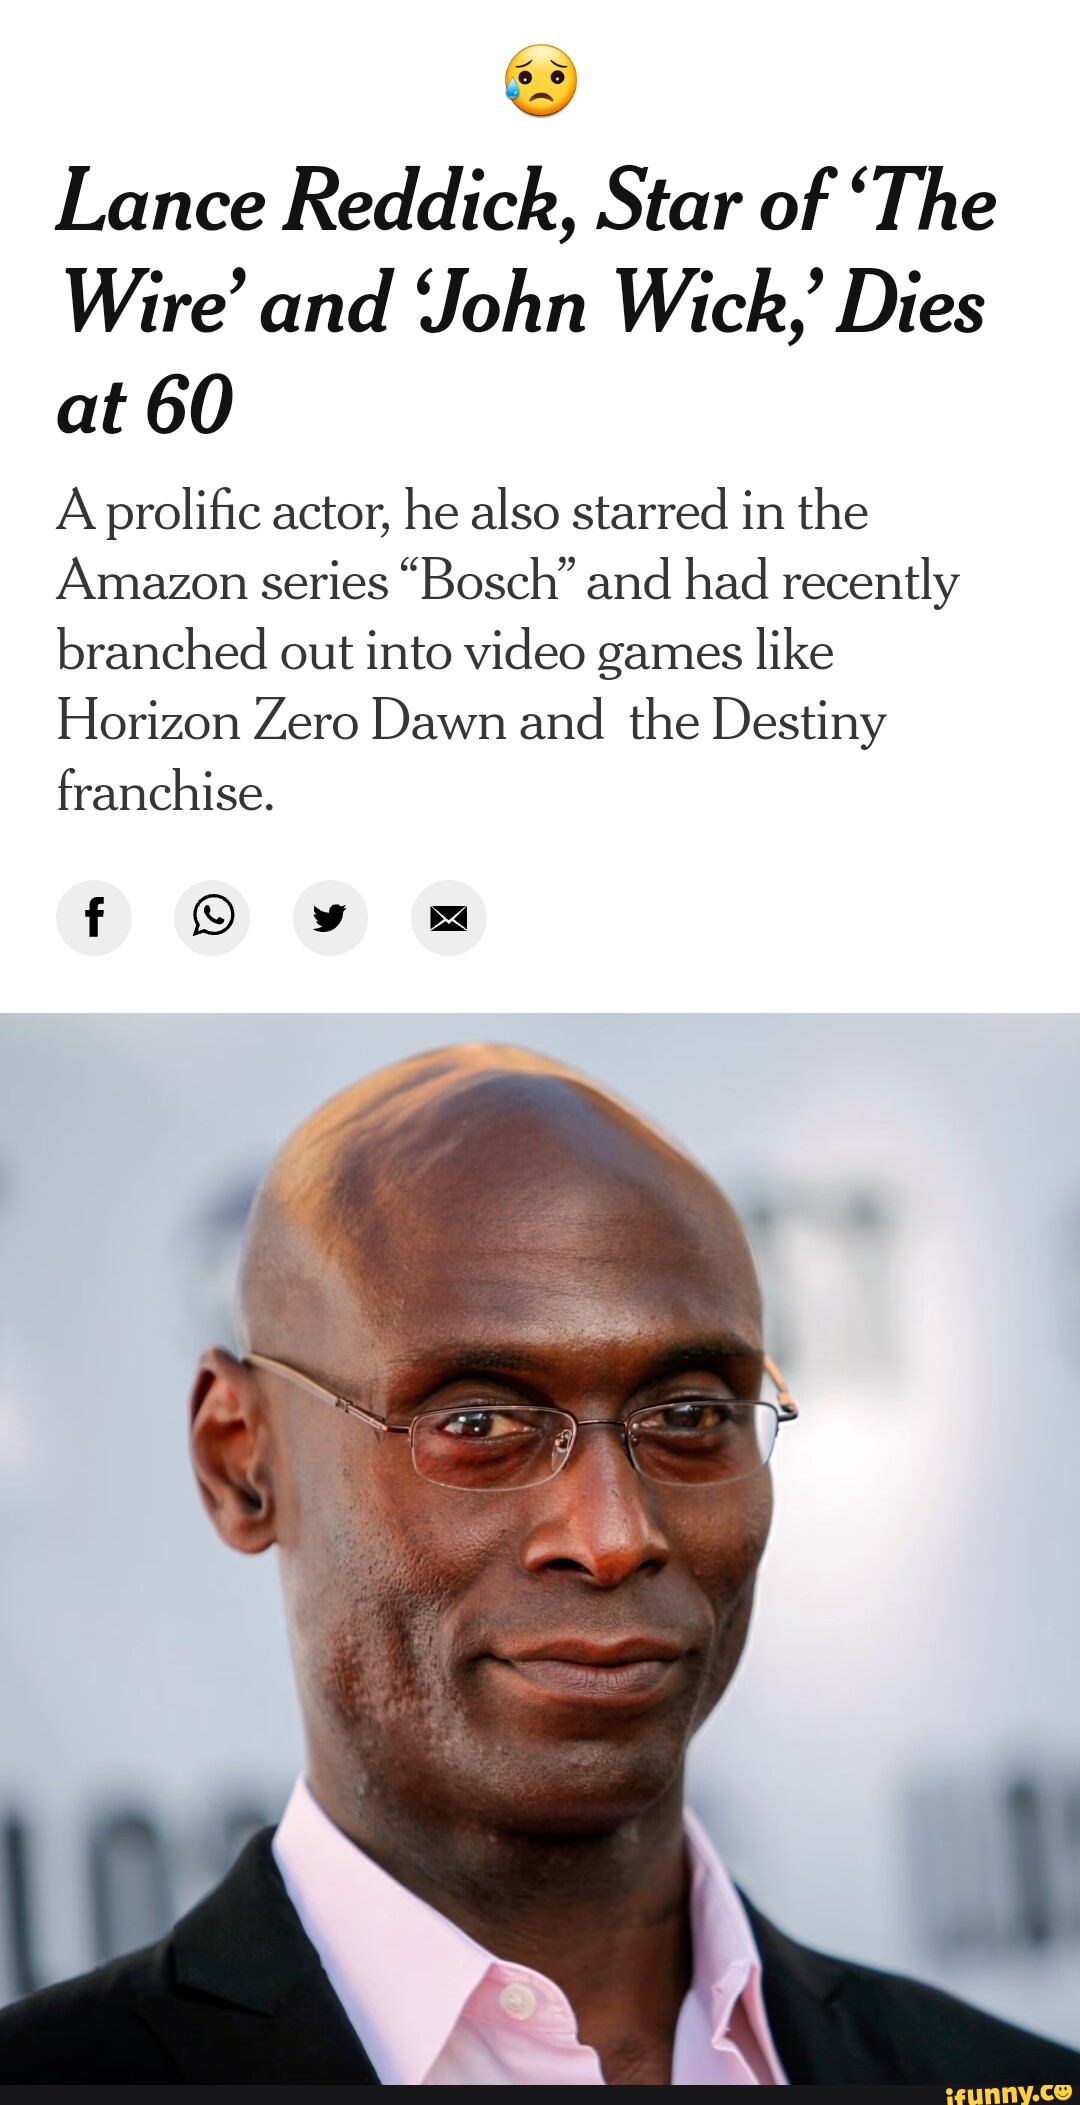 Actor Lance Reddick from The Wire, John Wick, and Destiny dead at